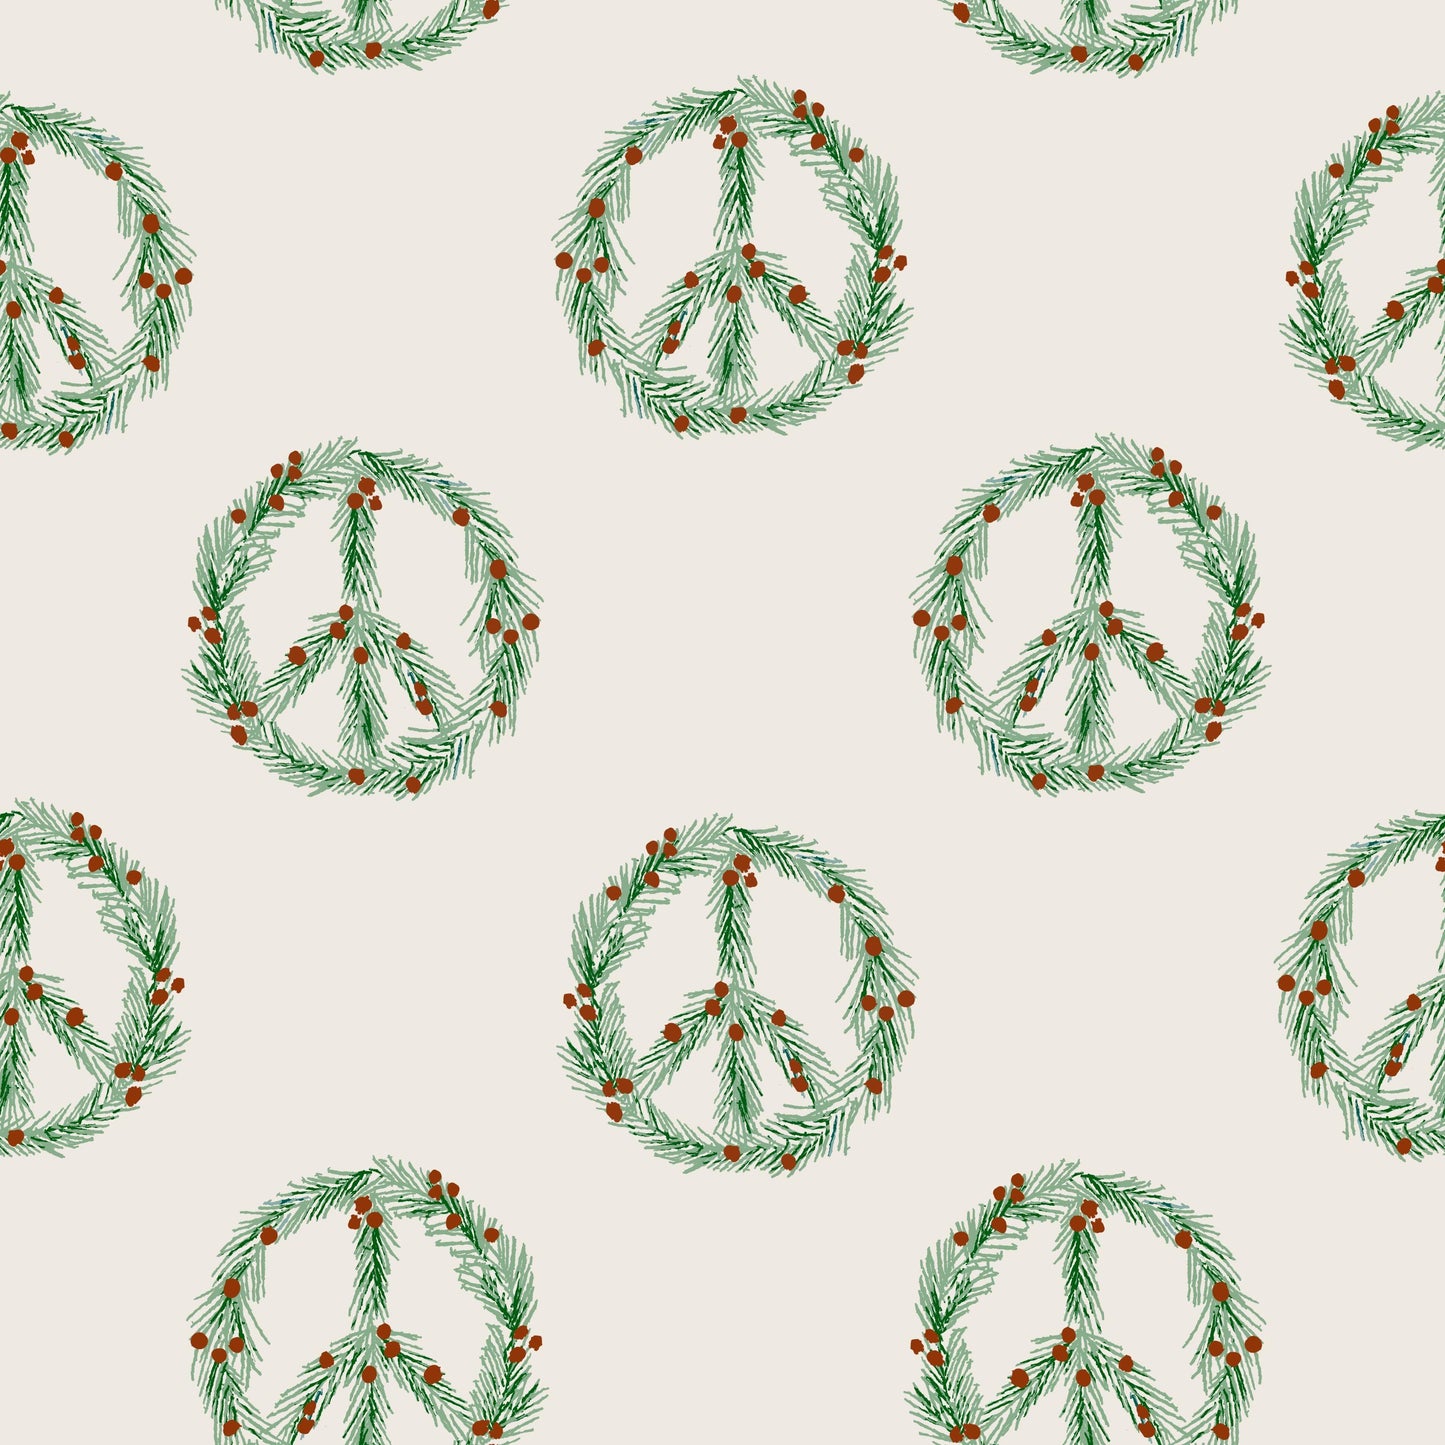 Winter Peace 1 mil PUL Fabric - Made in the USA - Nature's Fabrics